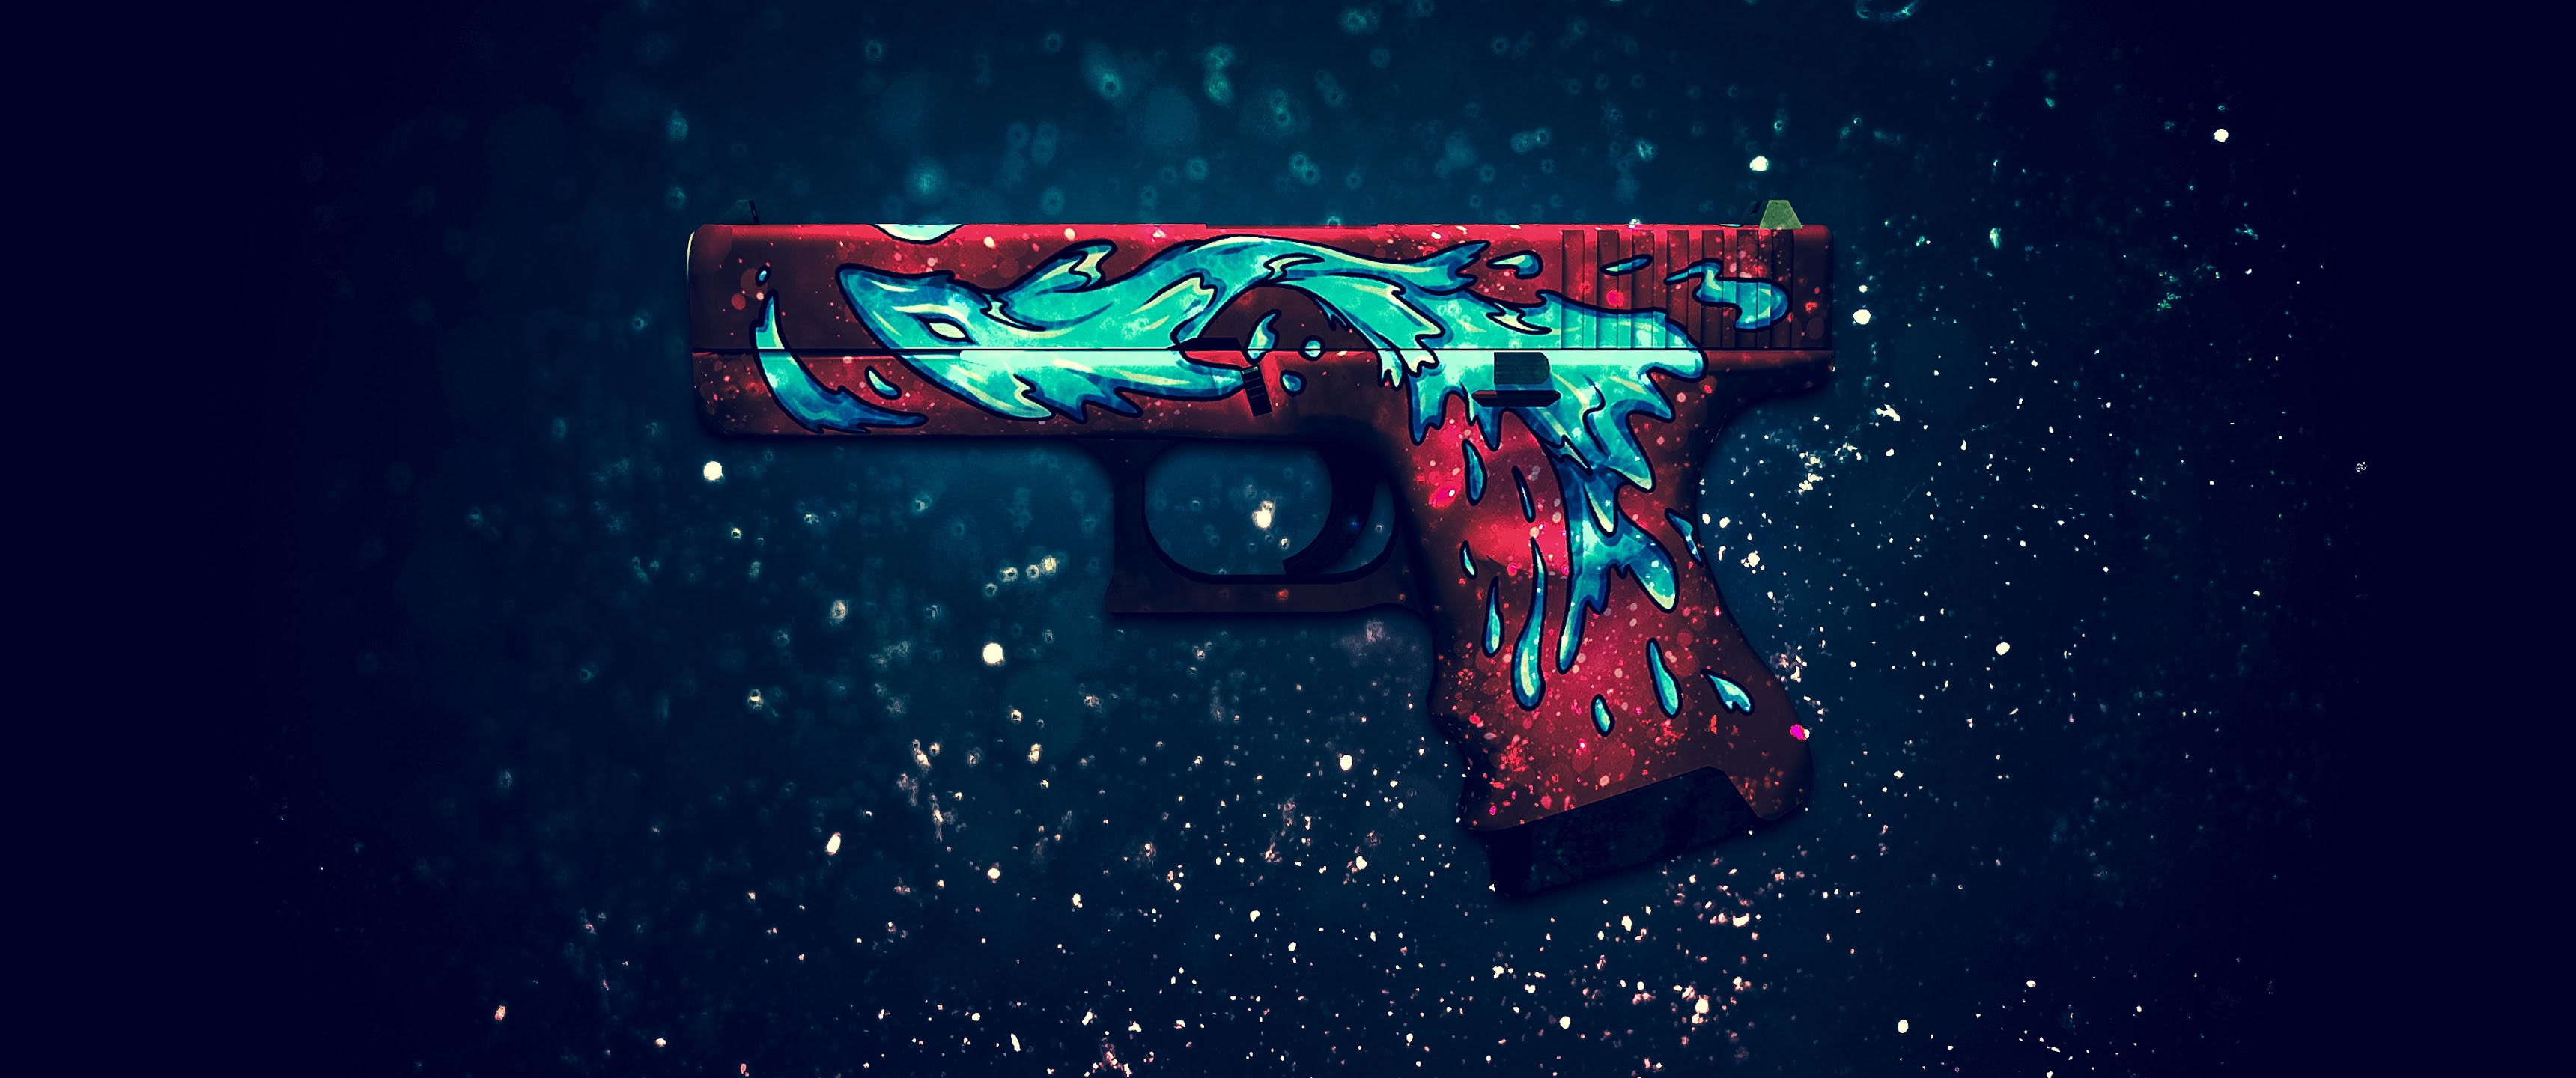 Glock-18 Night cs go skin download the new for ios